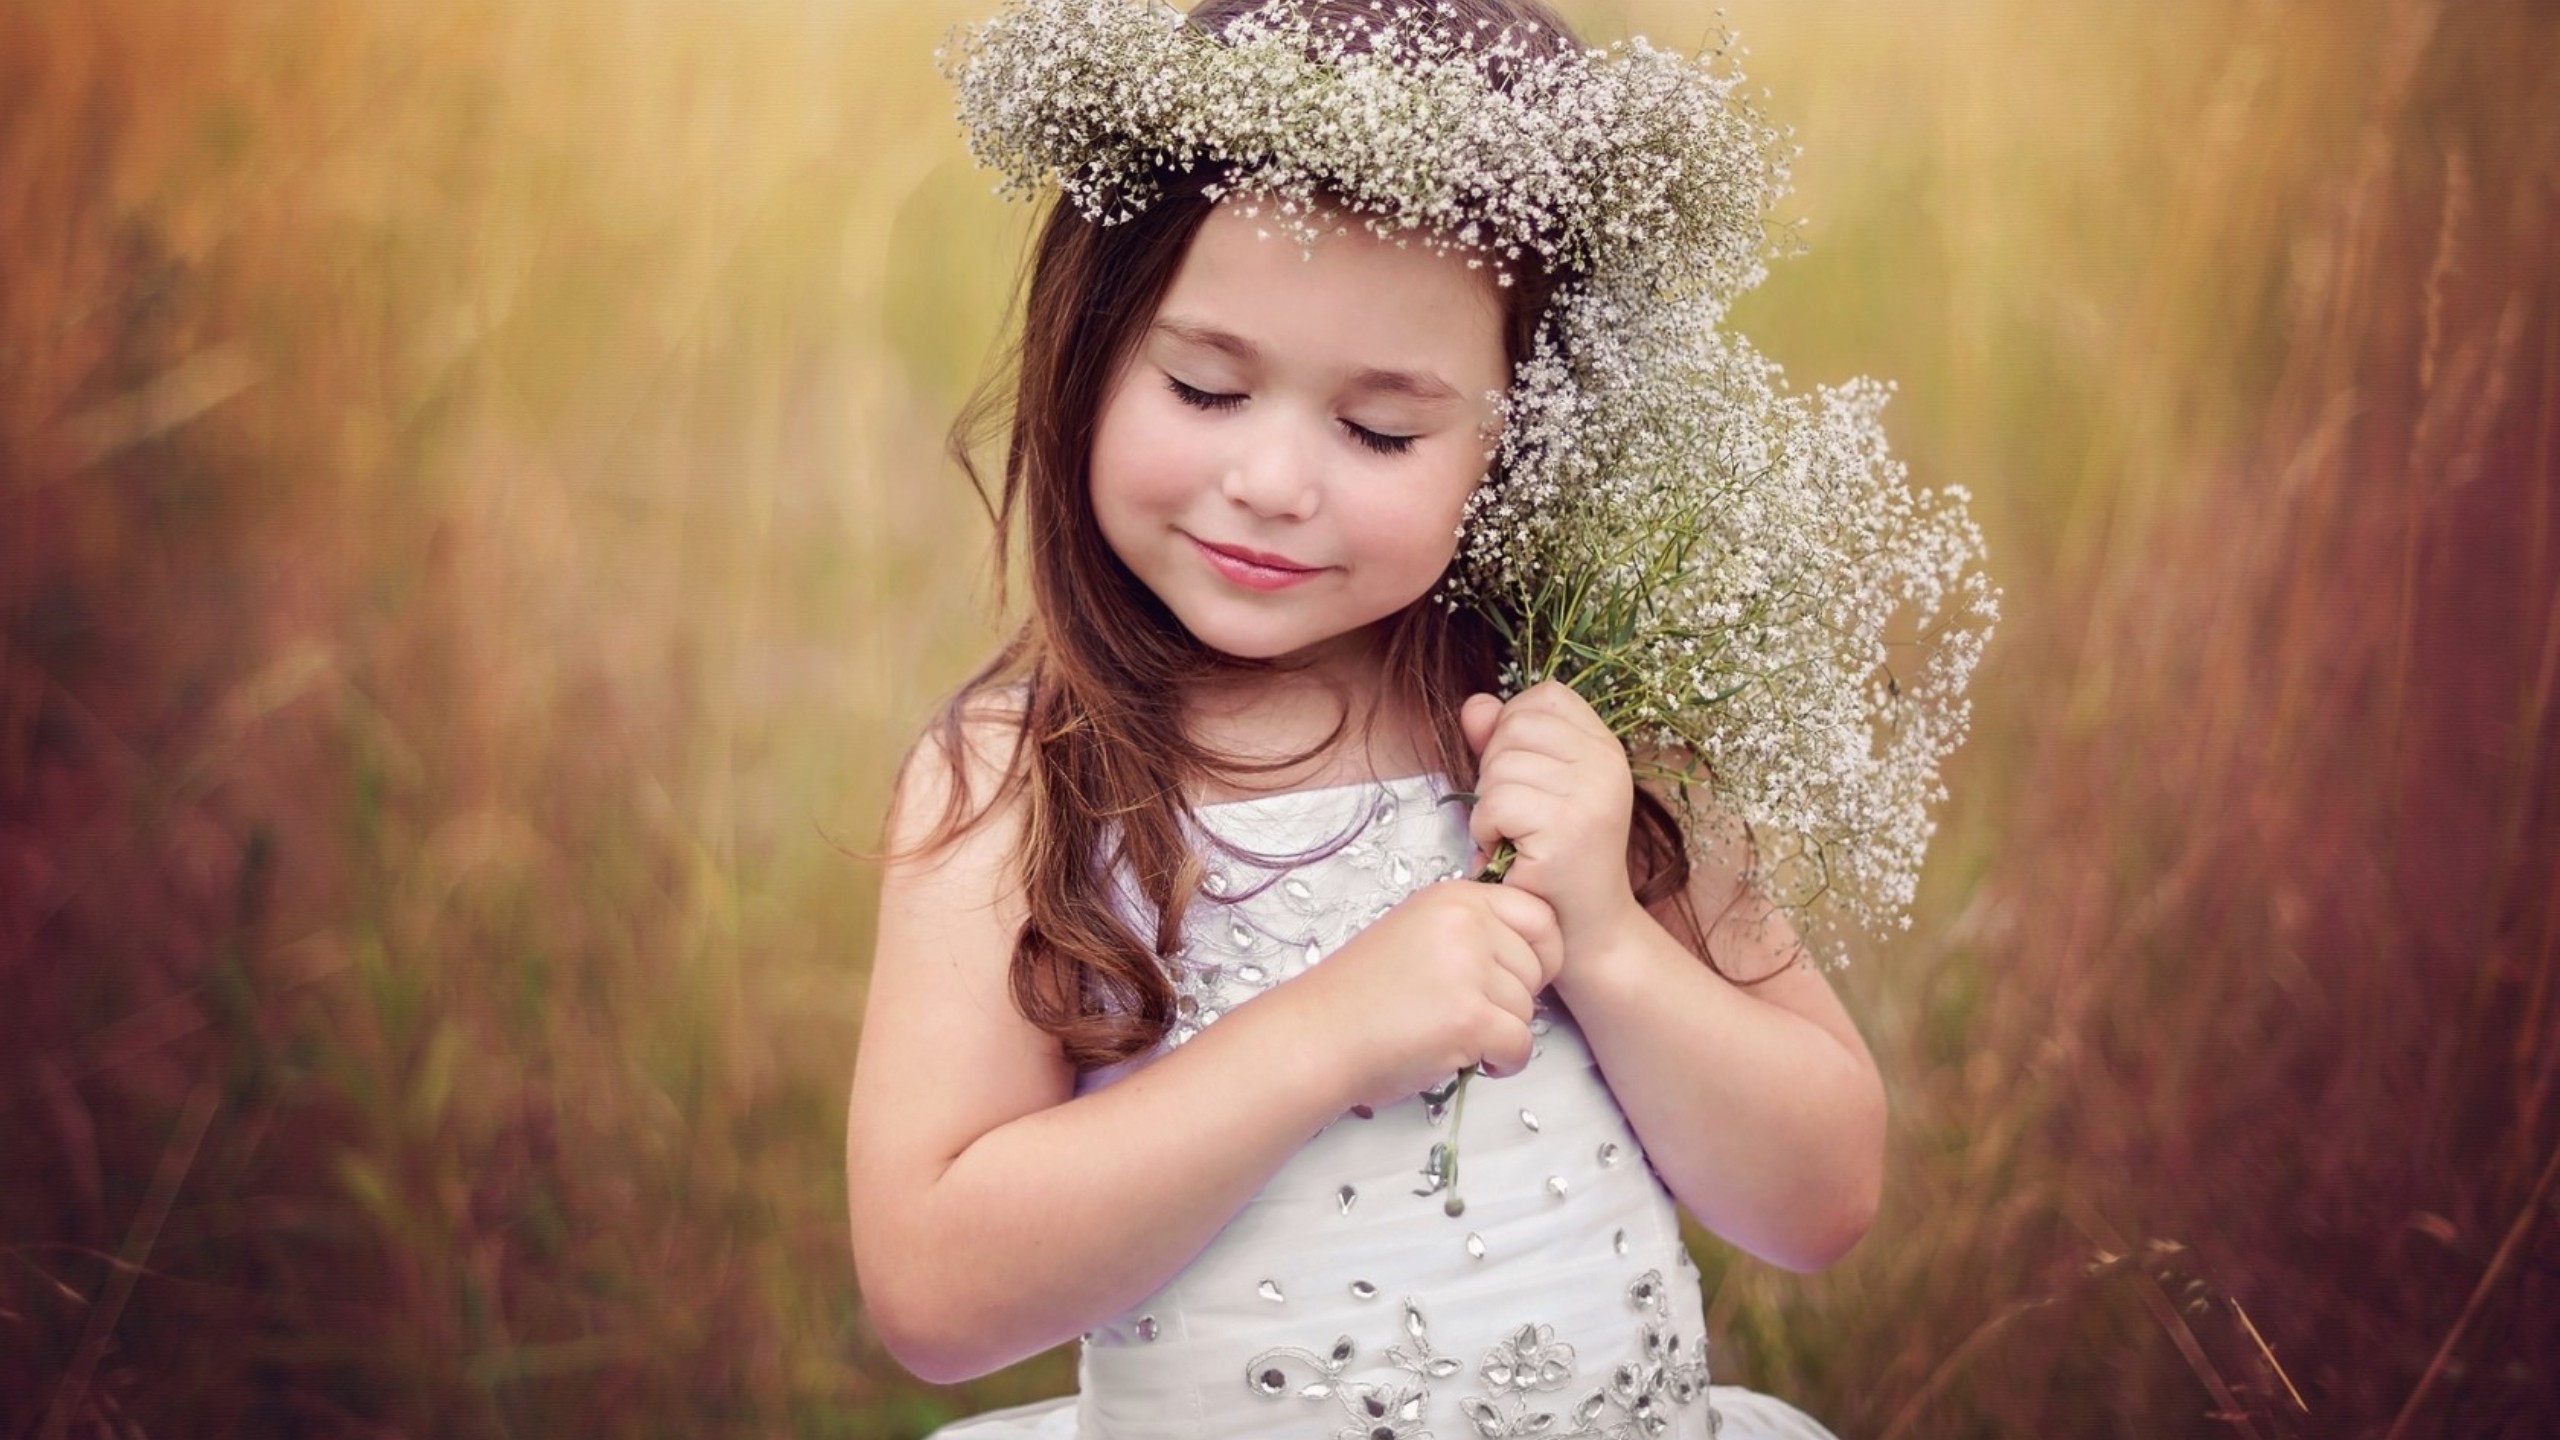 4K Little Girls Wallpapers High Quality | Download Free